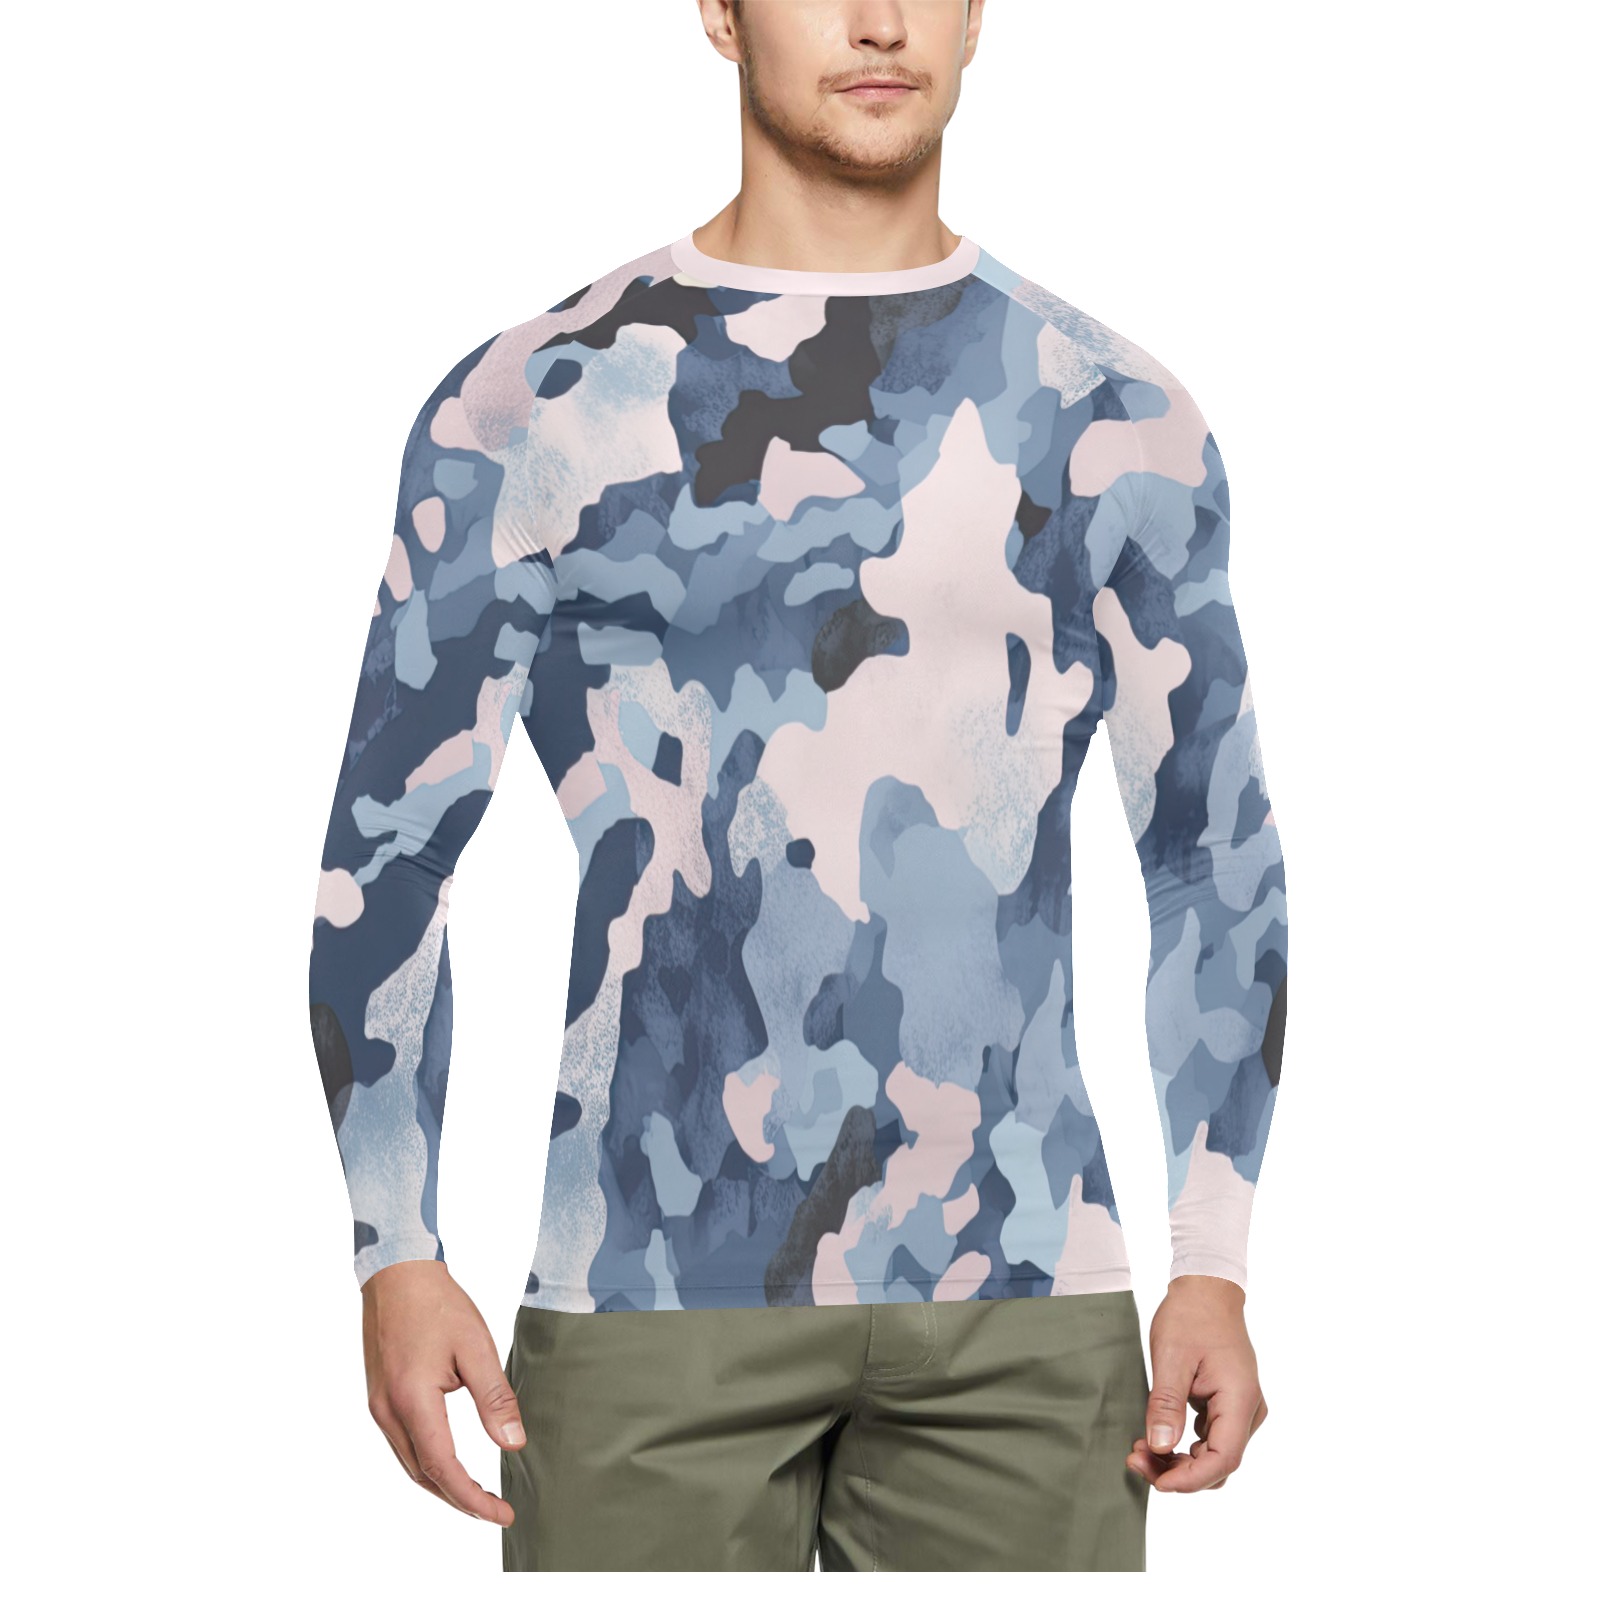 CG_camo_print_in_grey_blue_and_black_in_the_style_of_pointillis_cfbb5443-acd2-43a6-9568-7850894cff14 Men's Long Sleeve Swim Shirt (Model S39)